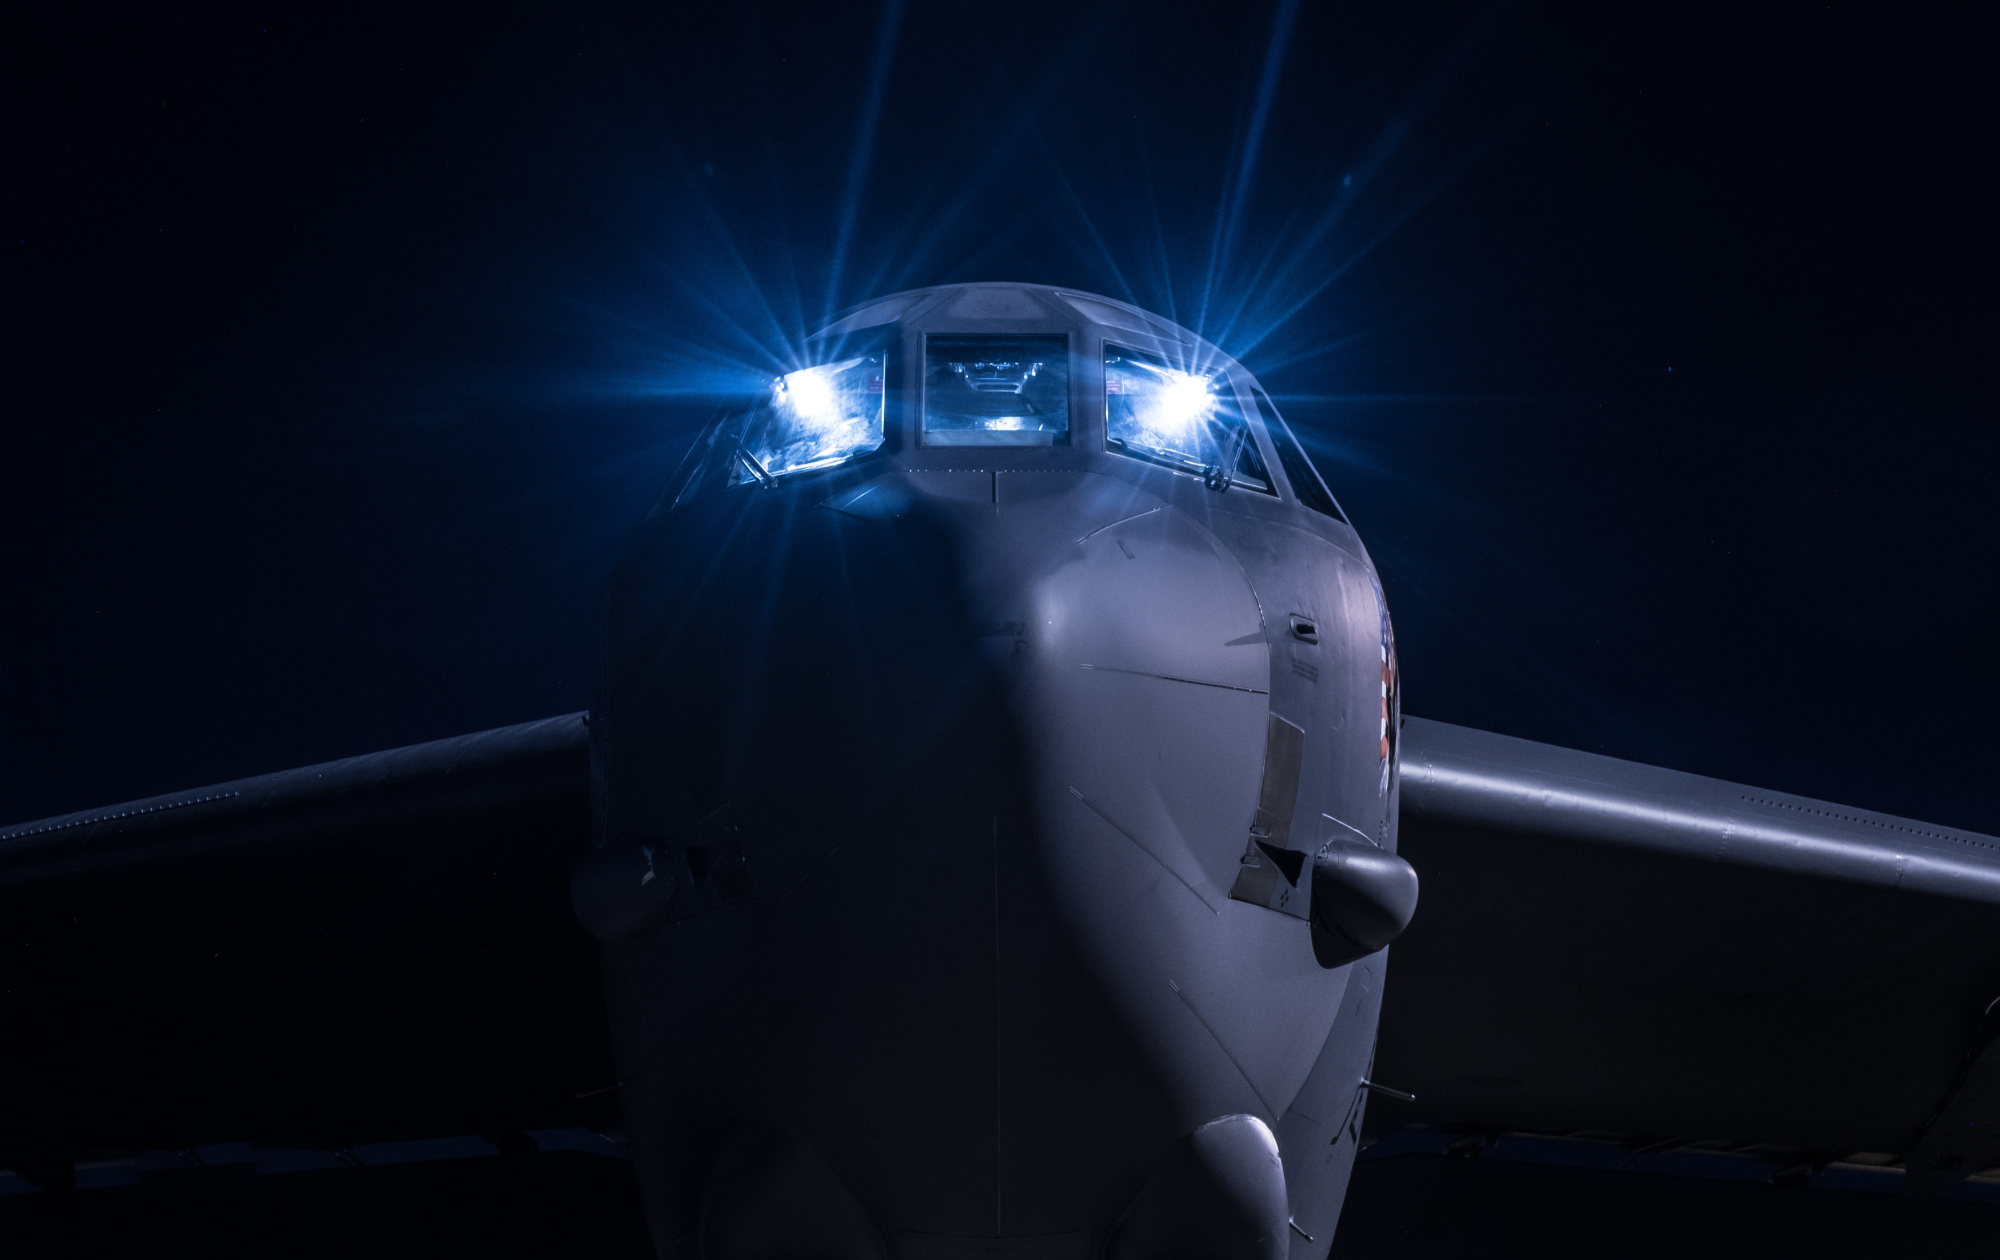 A U.S. Air Force B-52 crew works in the cockpit before launching an early morning sortie from Royal Australian Air Force Base Darwin in Australia in April last year. | U.S. AIR FORCE